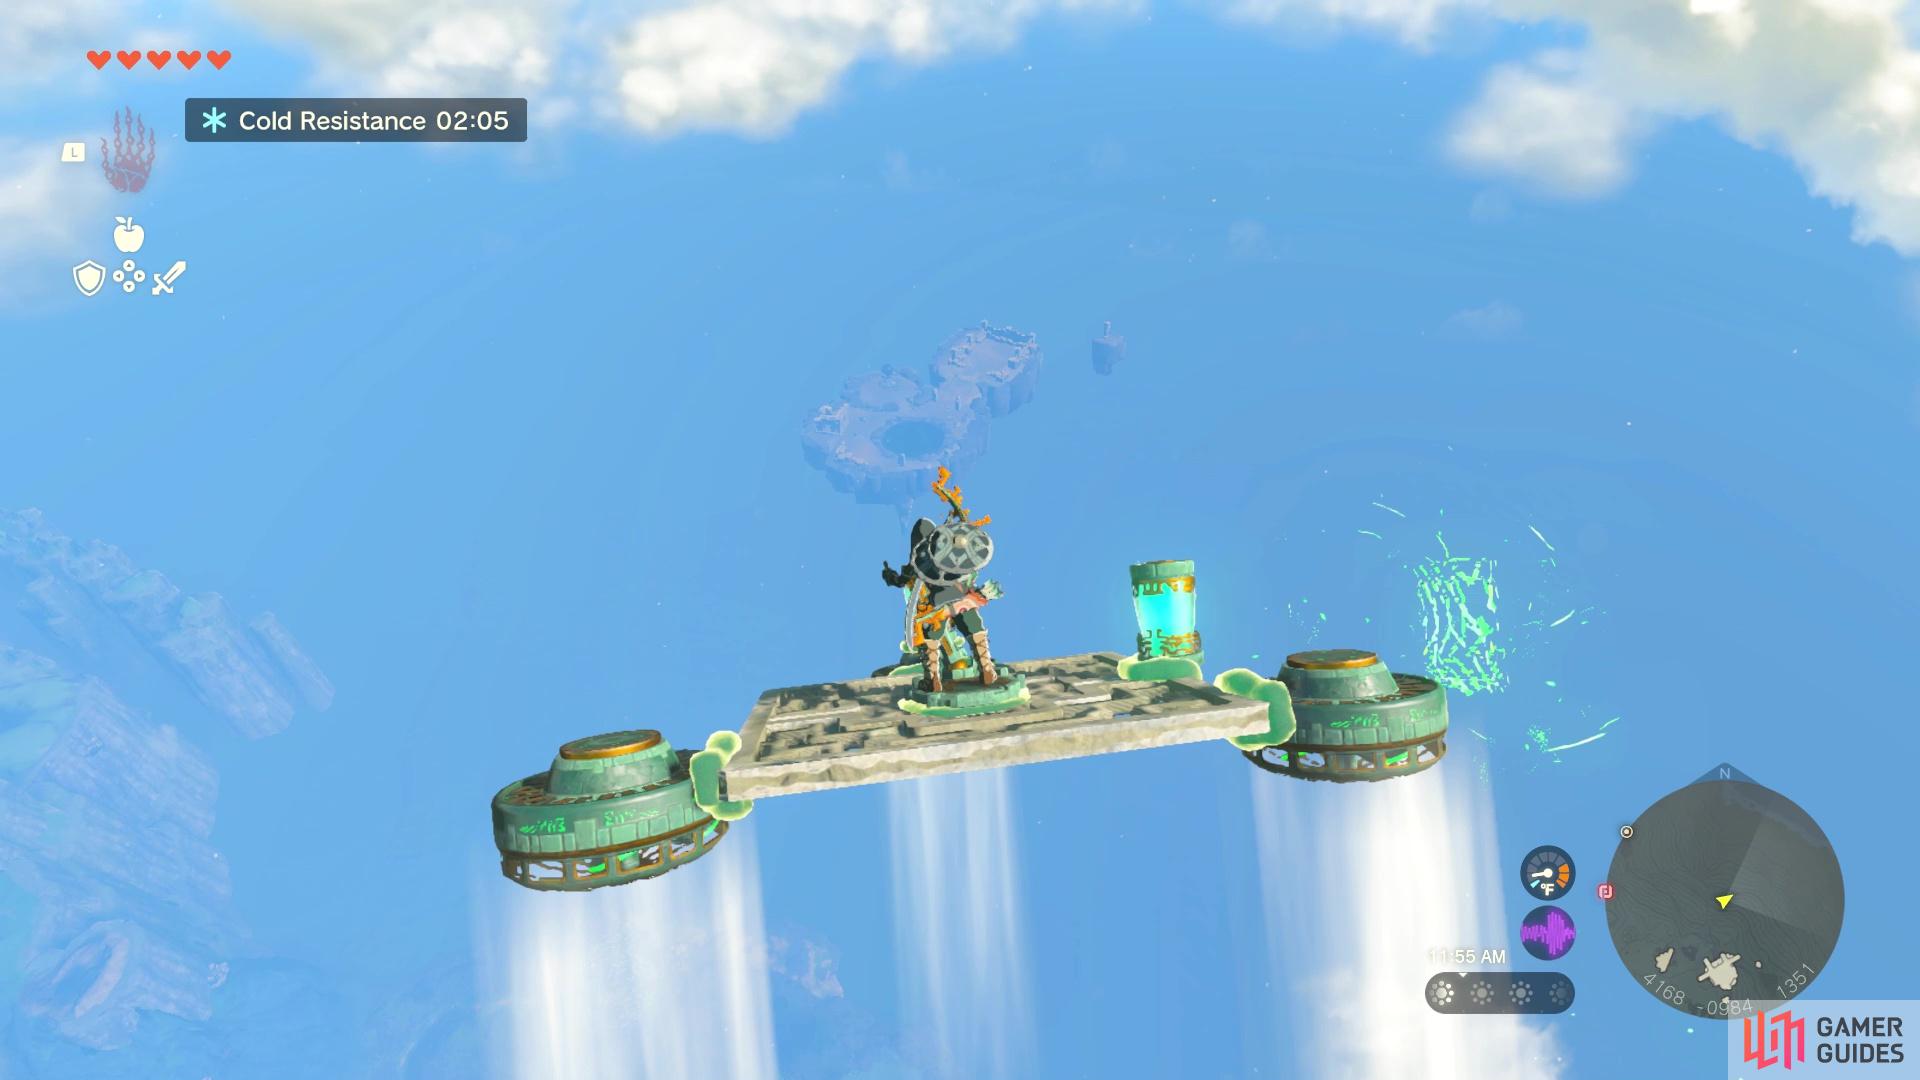 Use the flying device to reach !Courage Island and do the skydiving challenge